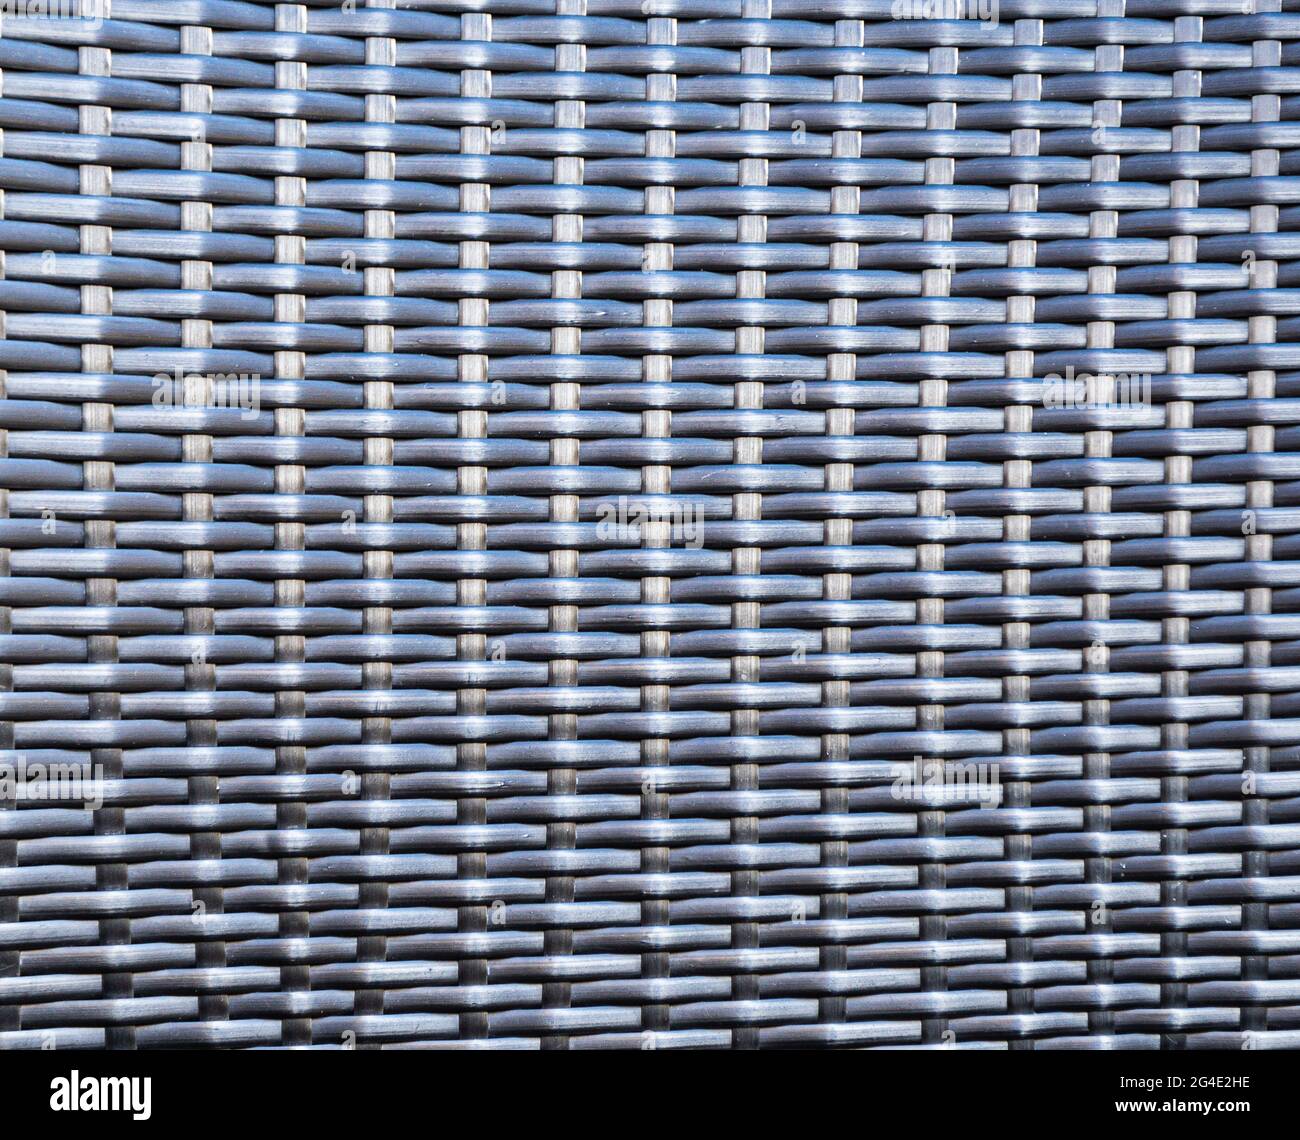 The texture of the furniture. Street furniture is rattan. Rattan texture. Stock Photo